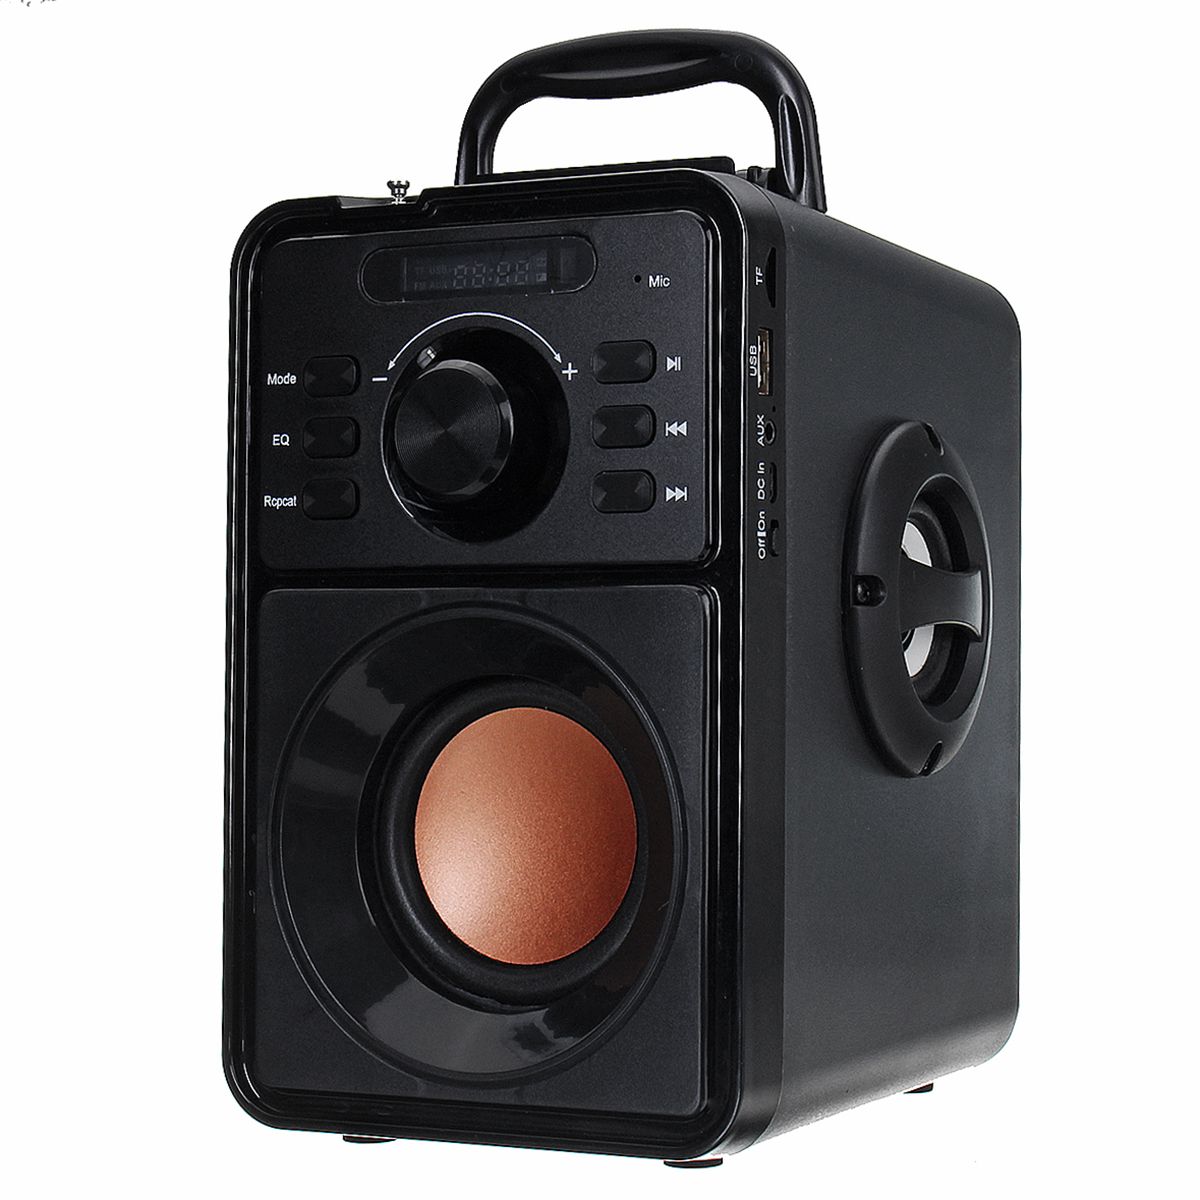 Bakeey-Wireless-bluetooth-Speaker-Heavy-Bass-Stereo-Surround-Sound-Portable-Music-Player-with-FM-TF--1636297